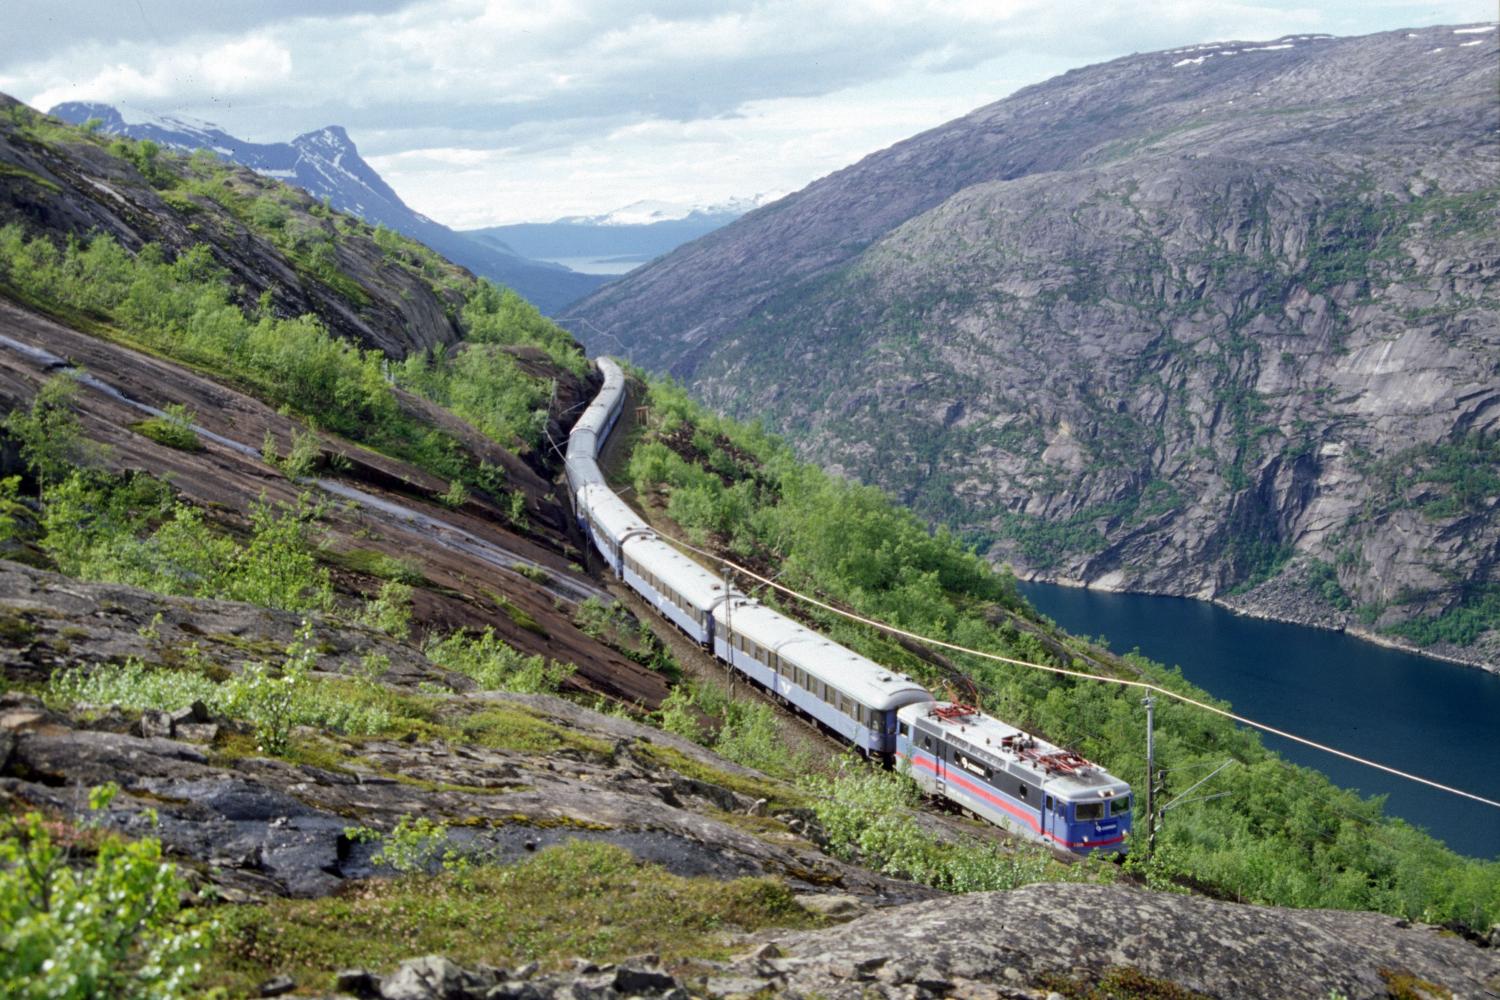 Experience the Ofotbanen Railway and the Navvy Road with a local guide